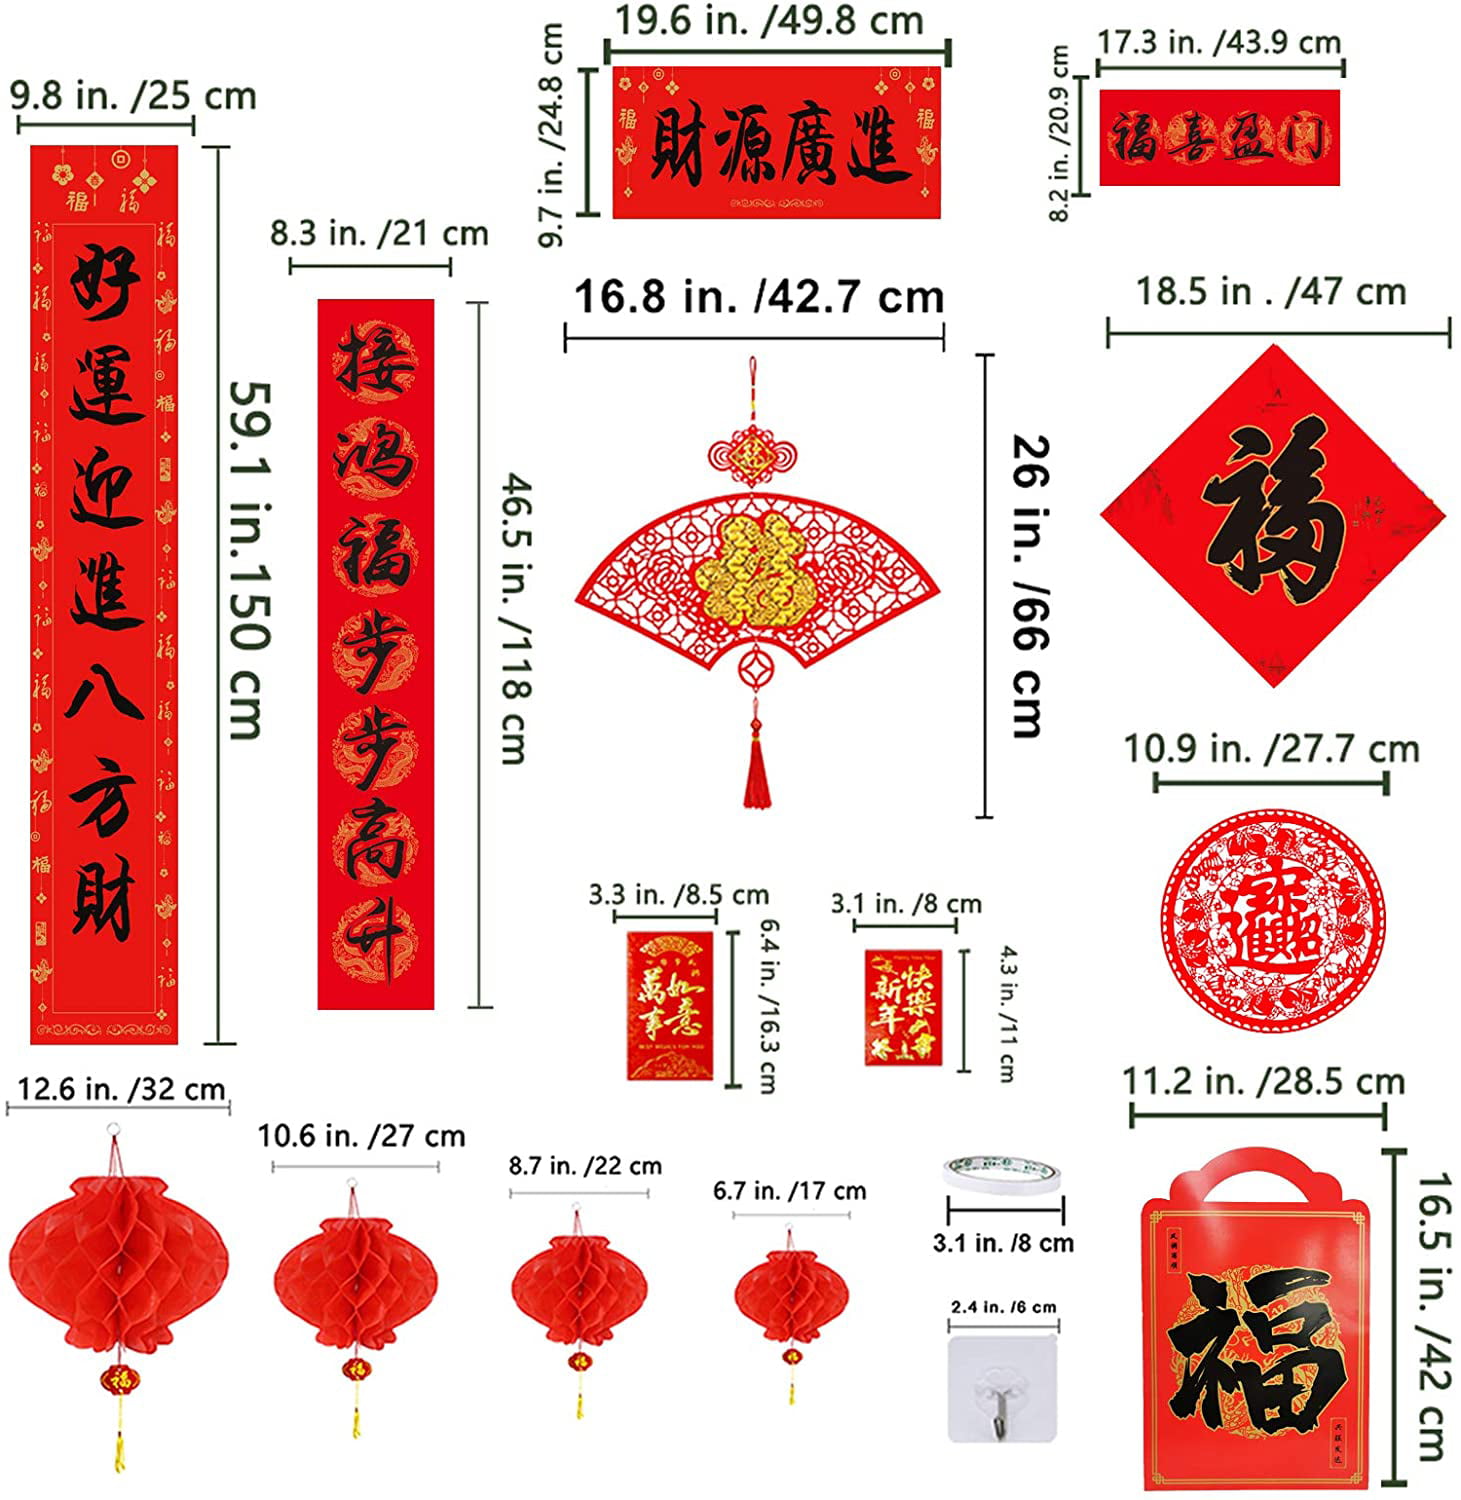 Chinese New Year Decorations Spring Chunlian Duilian Chinese Couplets Poem Scrolls FU Sticker Red Hong Bao Lanterns Chinese Character Paper Cutting Fu Ornament for Lunar New Year of The Ox 2021 